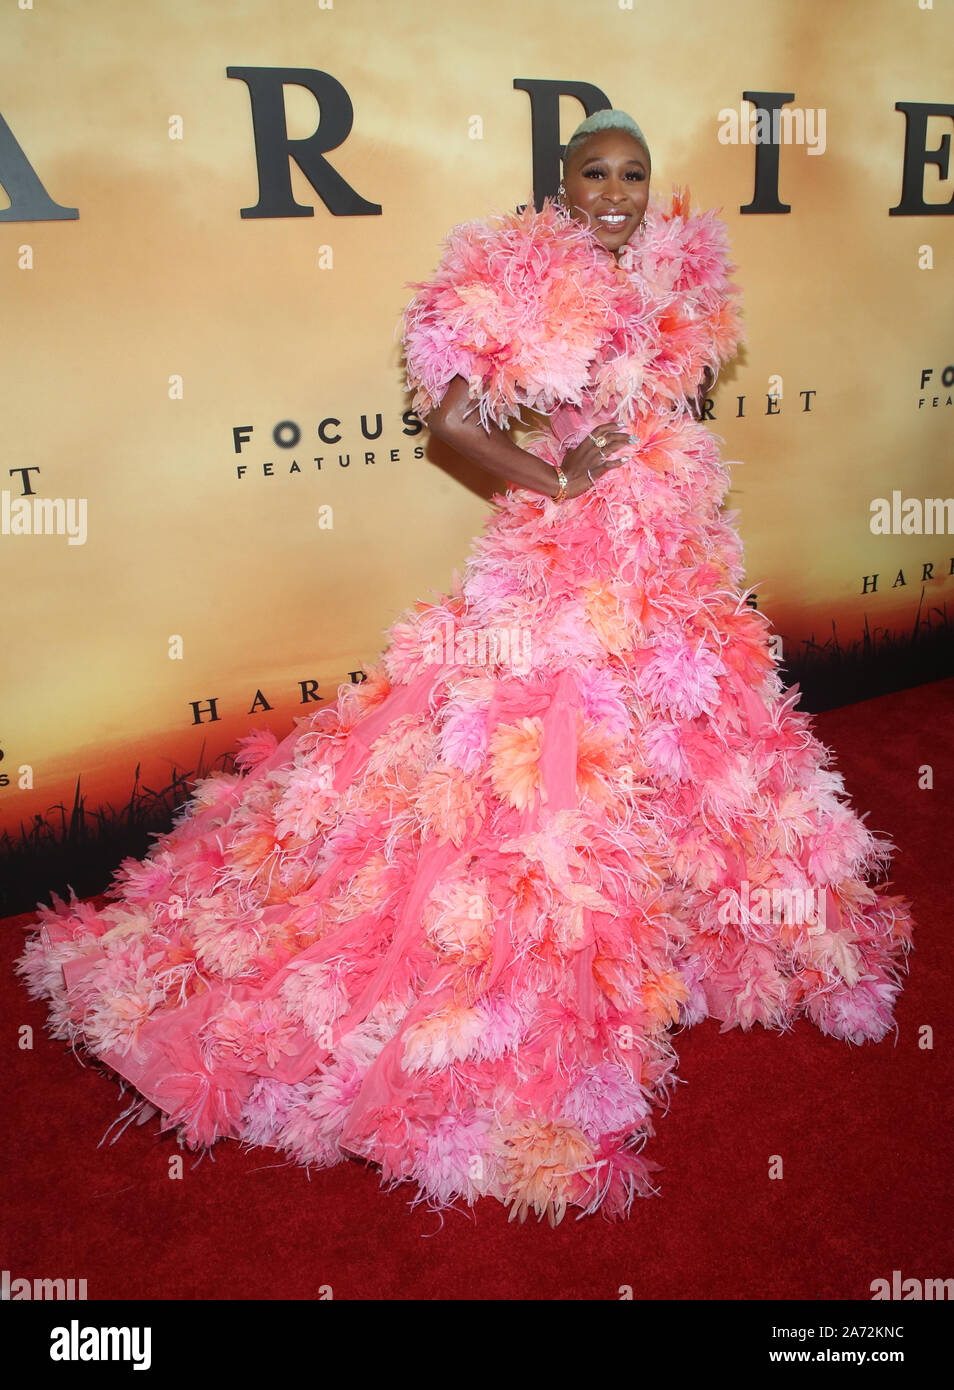 Los Angeles, Ca. 29th Oct, 2019. Cynthia Erivo at the Los Angeles Premiere of Harriet at The Orpheum in Los Angeles, California on October 29, 2019. Credit: Faye Sadou/Media Punch/Alamy Live News Stock Photo